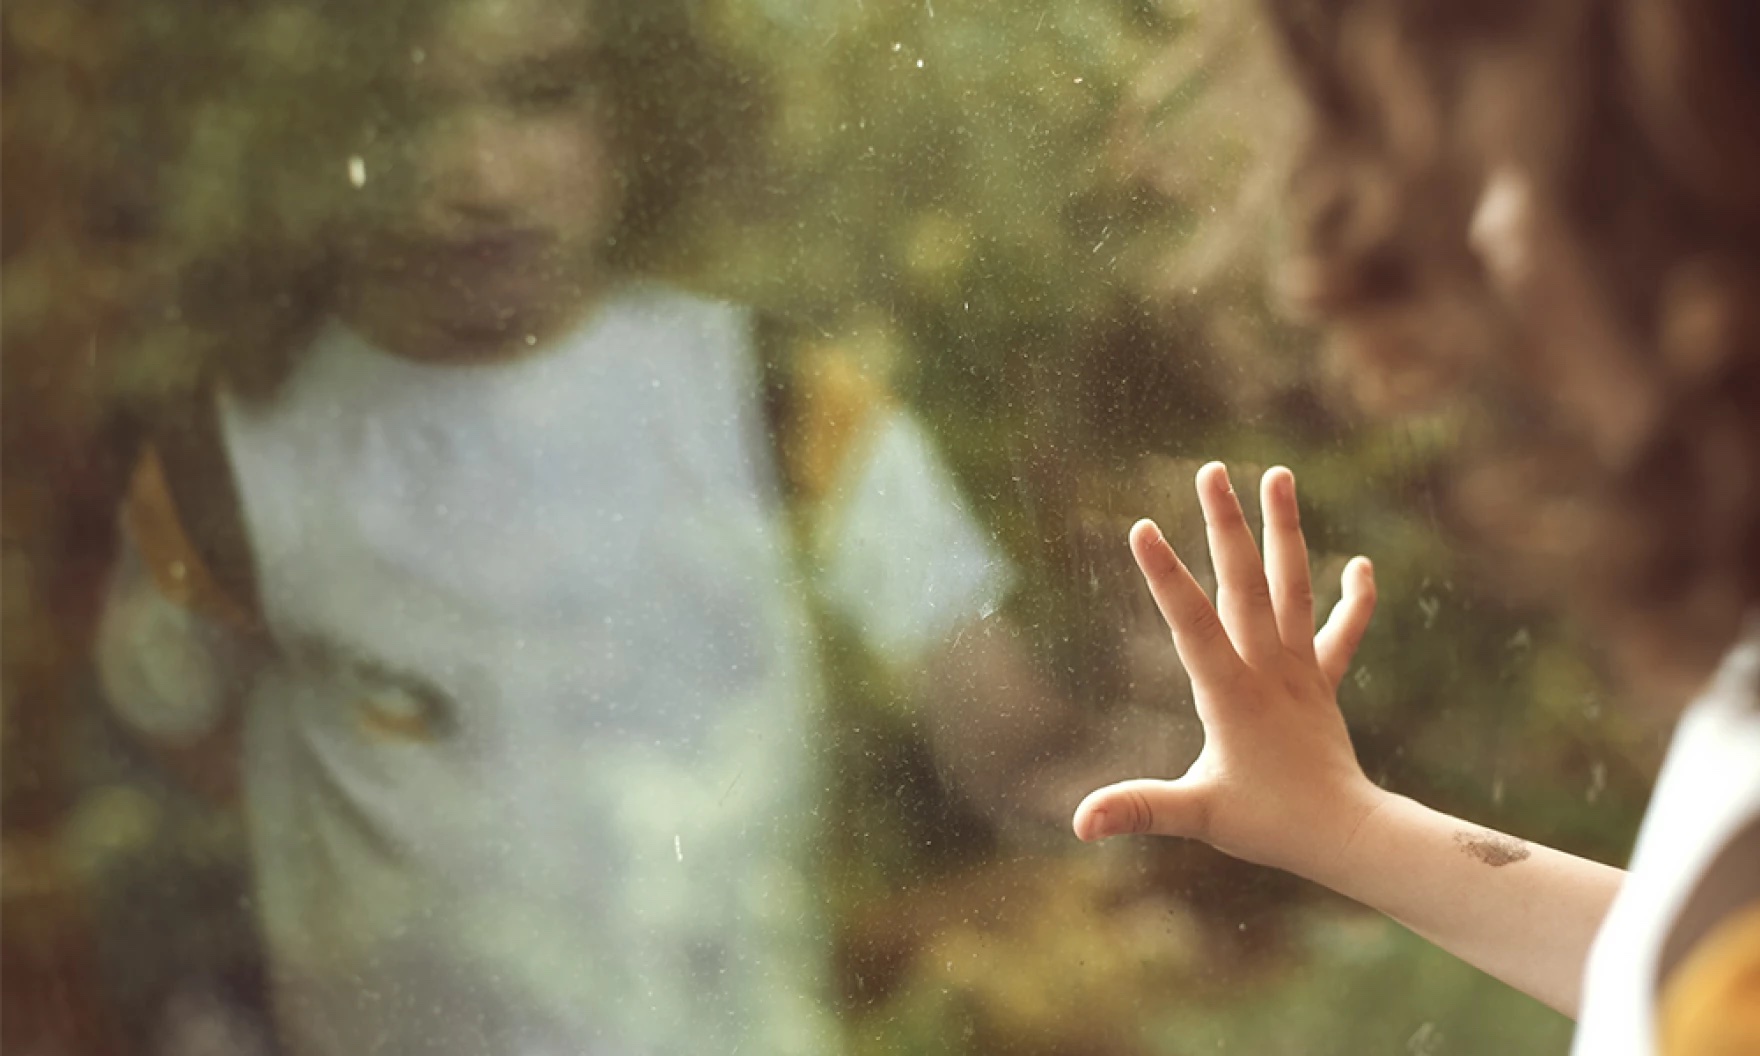 A child places hand on window.